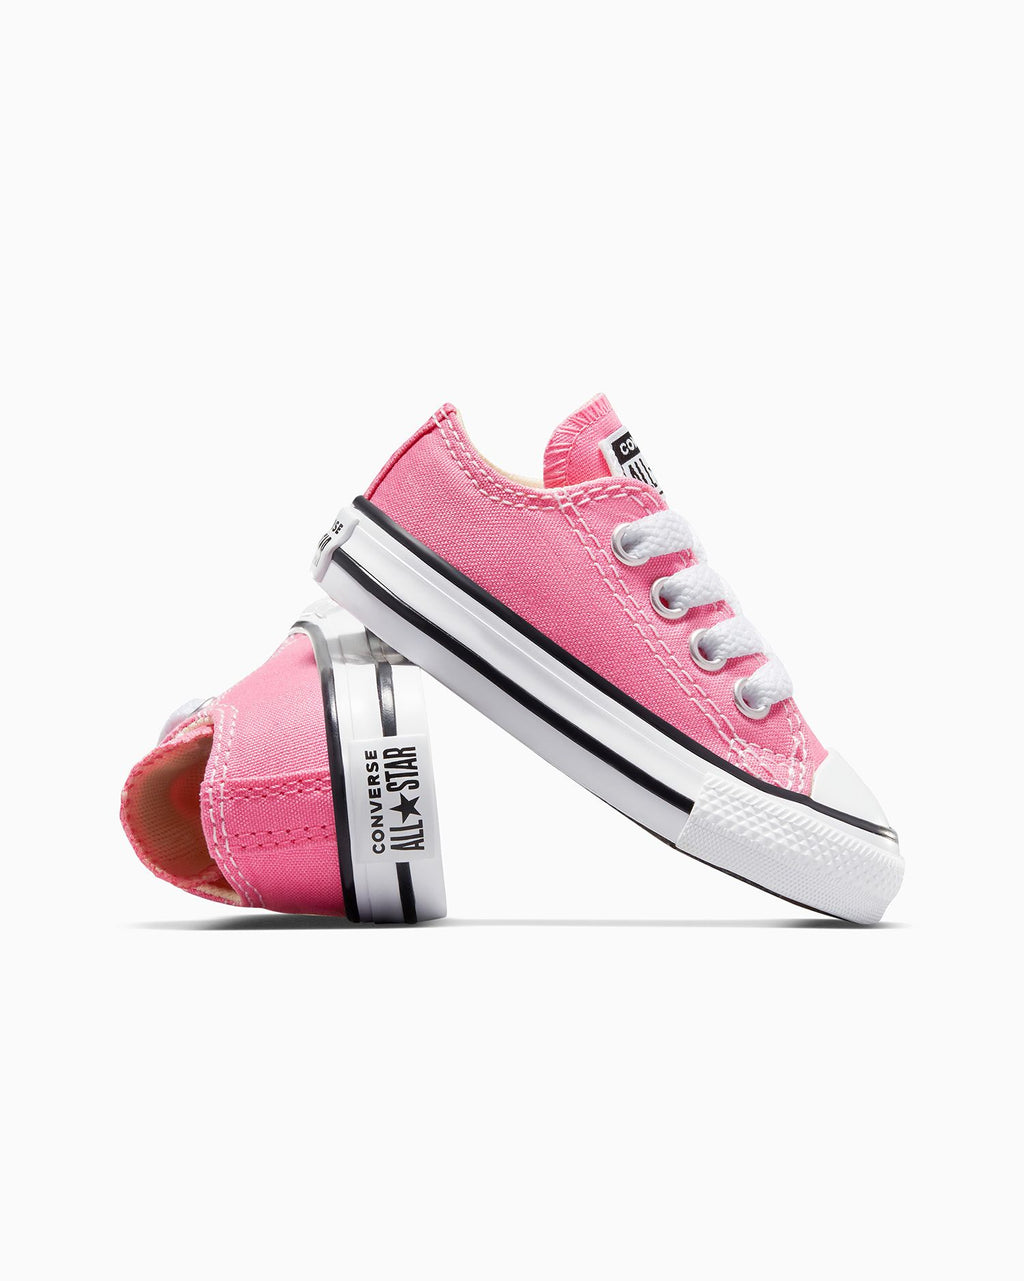 CT-P35 (Converse chuck taylor low pink/white) 101492950